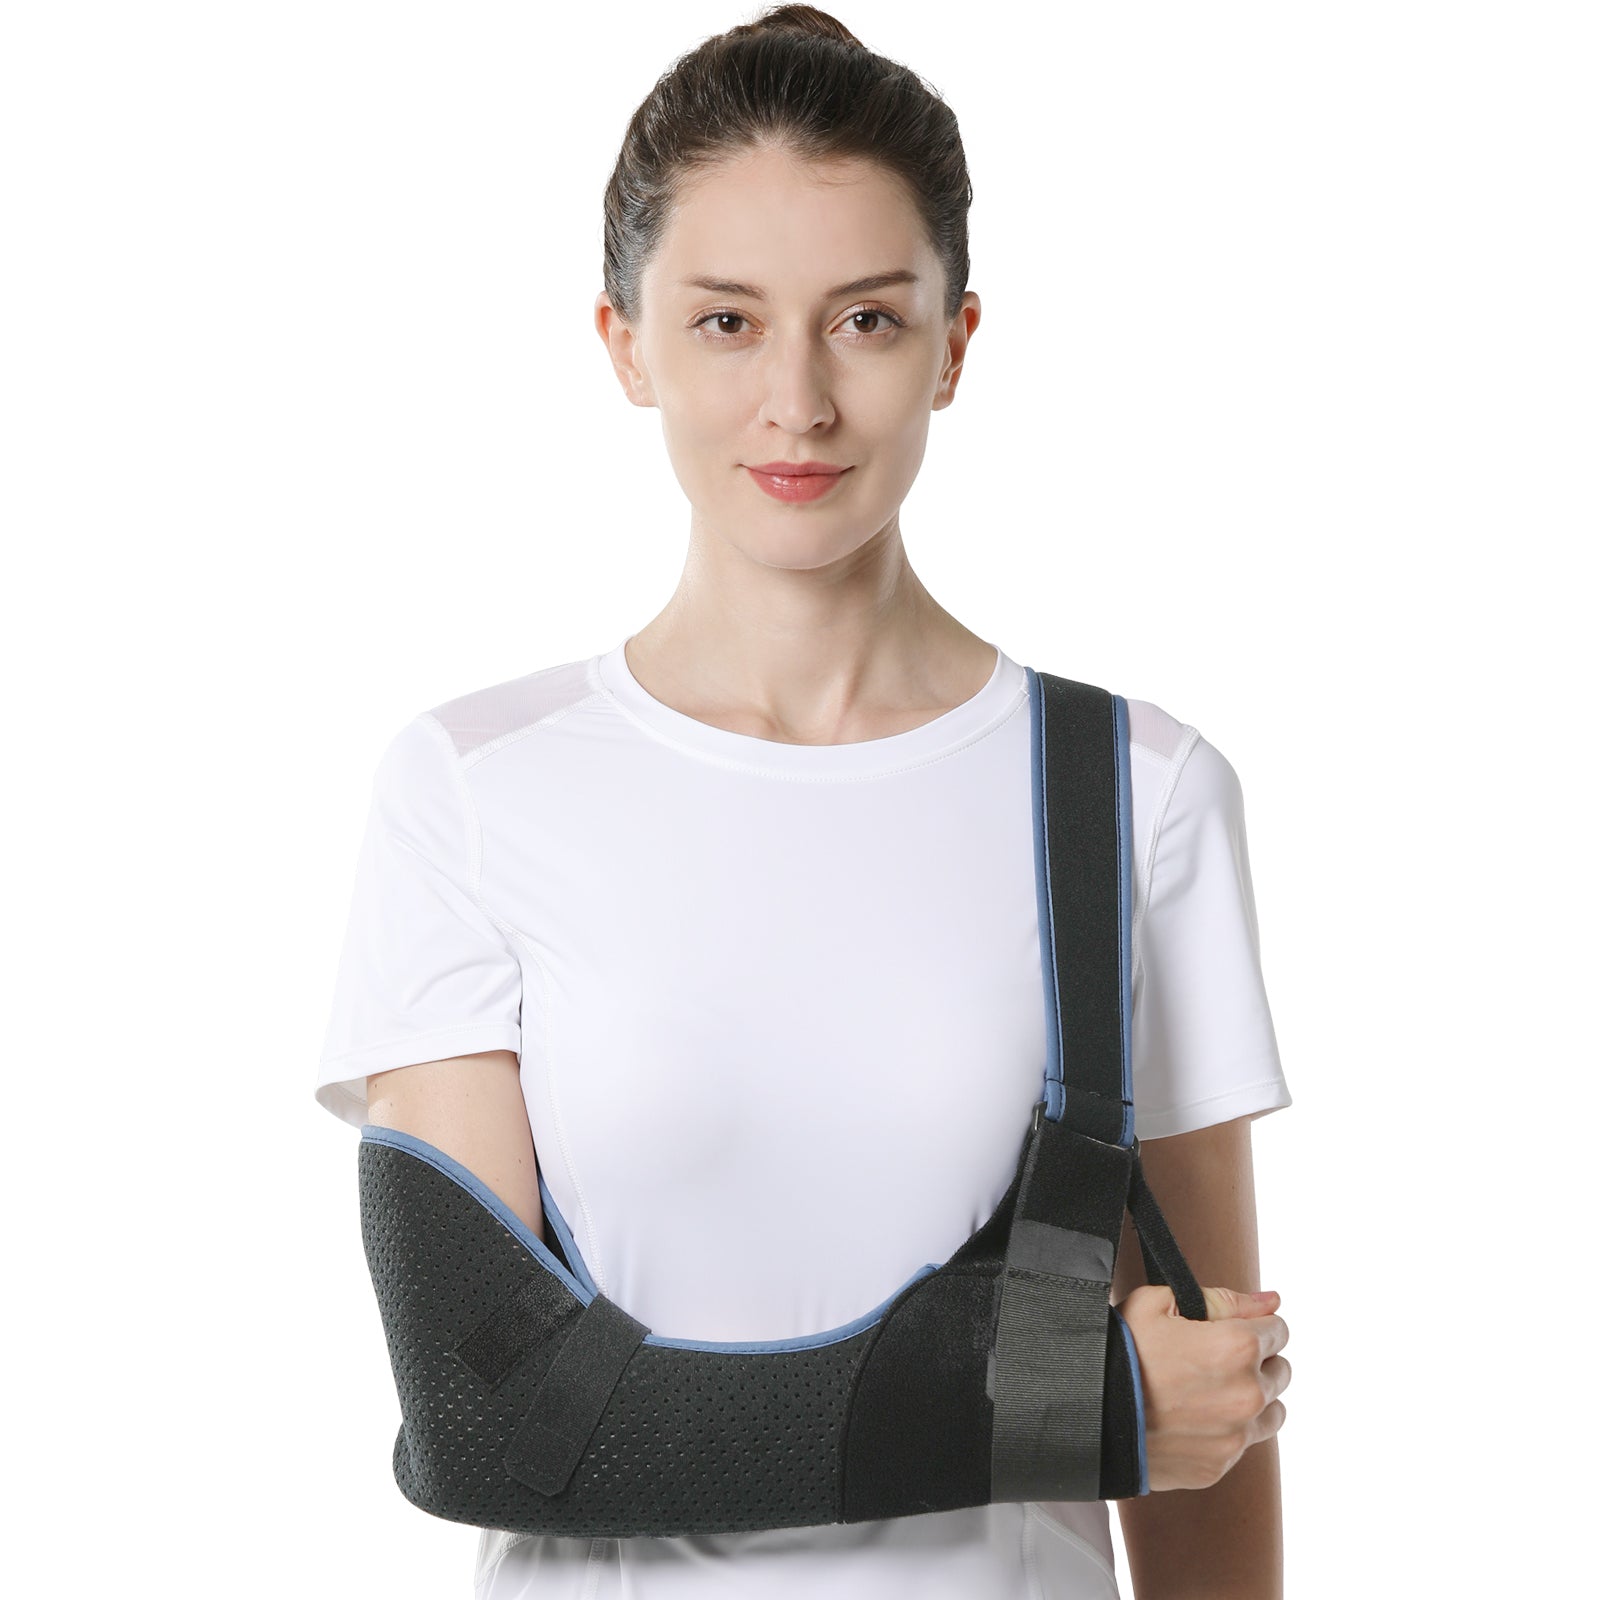 VELPEAU Arm Sling Shoulder Immobilizer – Rotator Cuff Support Brace  Professional - La Paz County Sheriff's Office Dedicated to Service